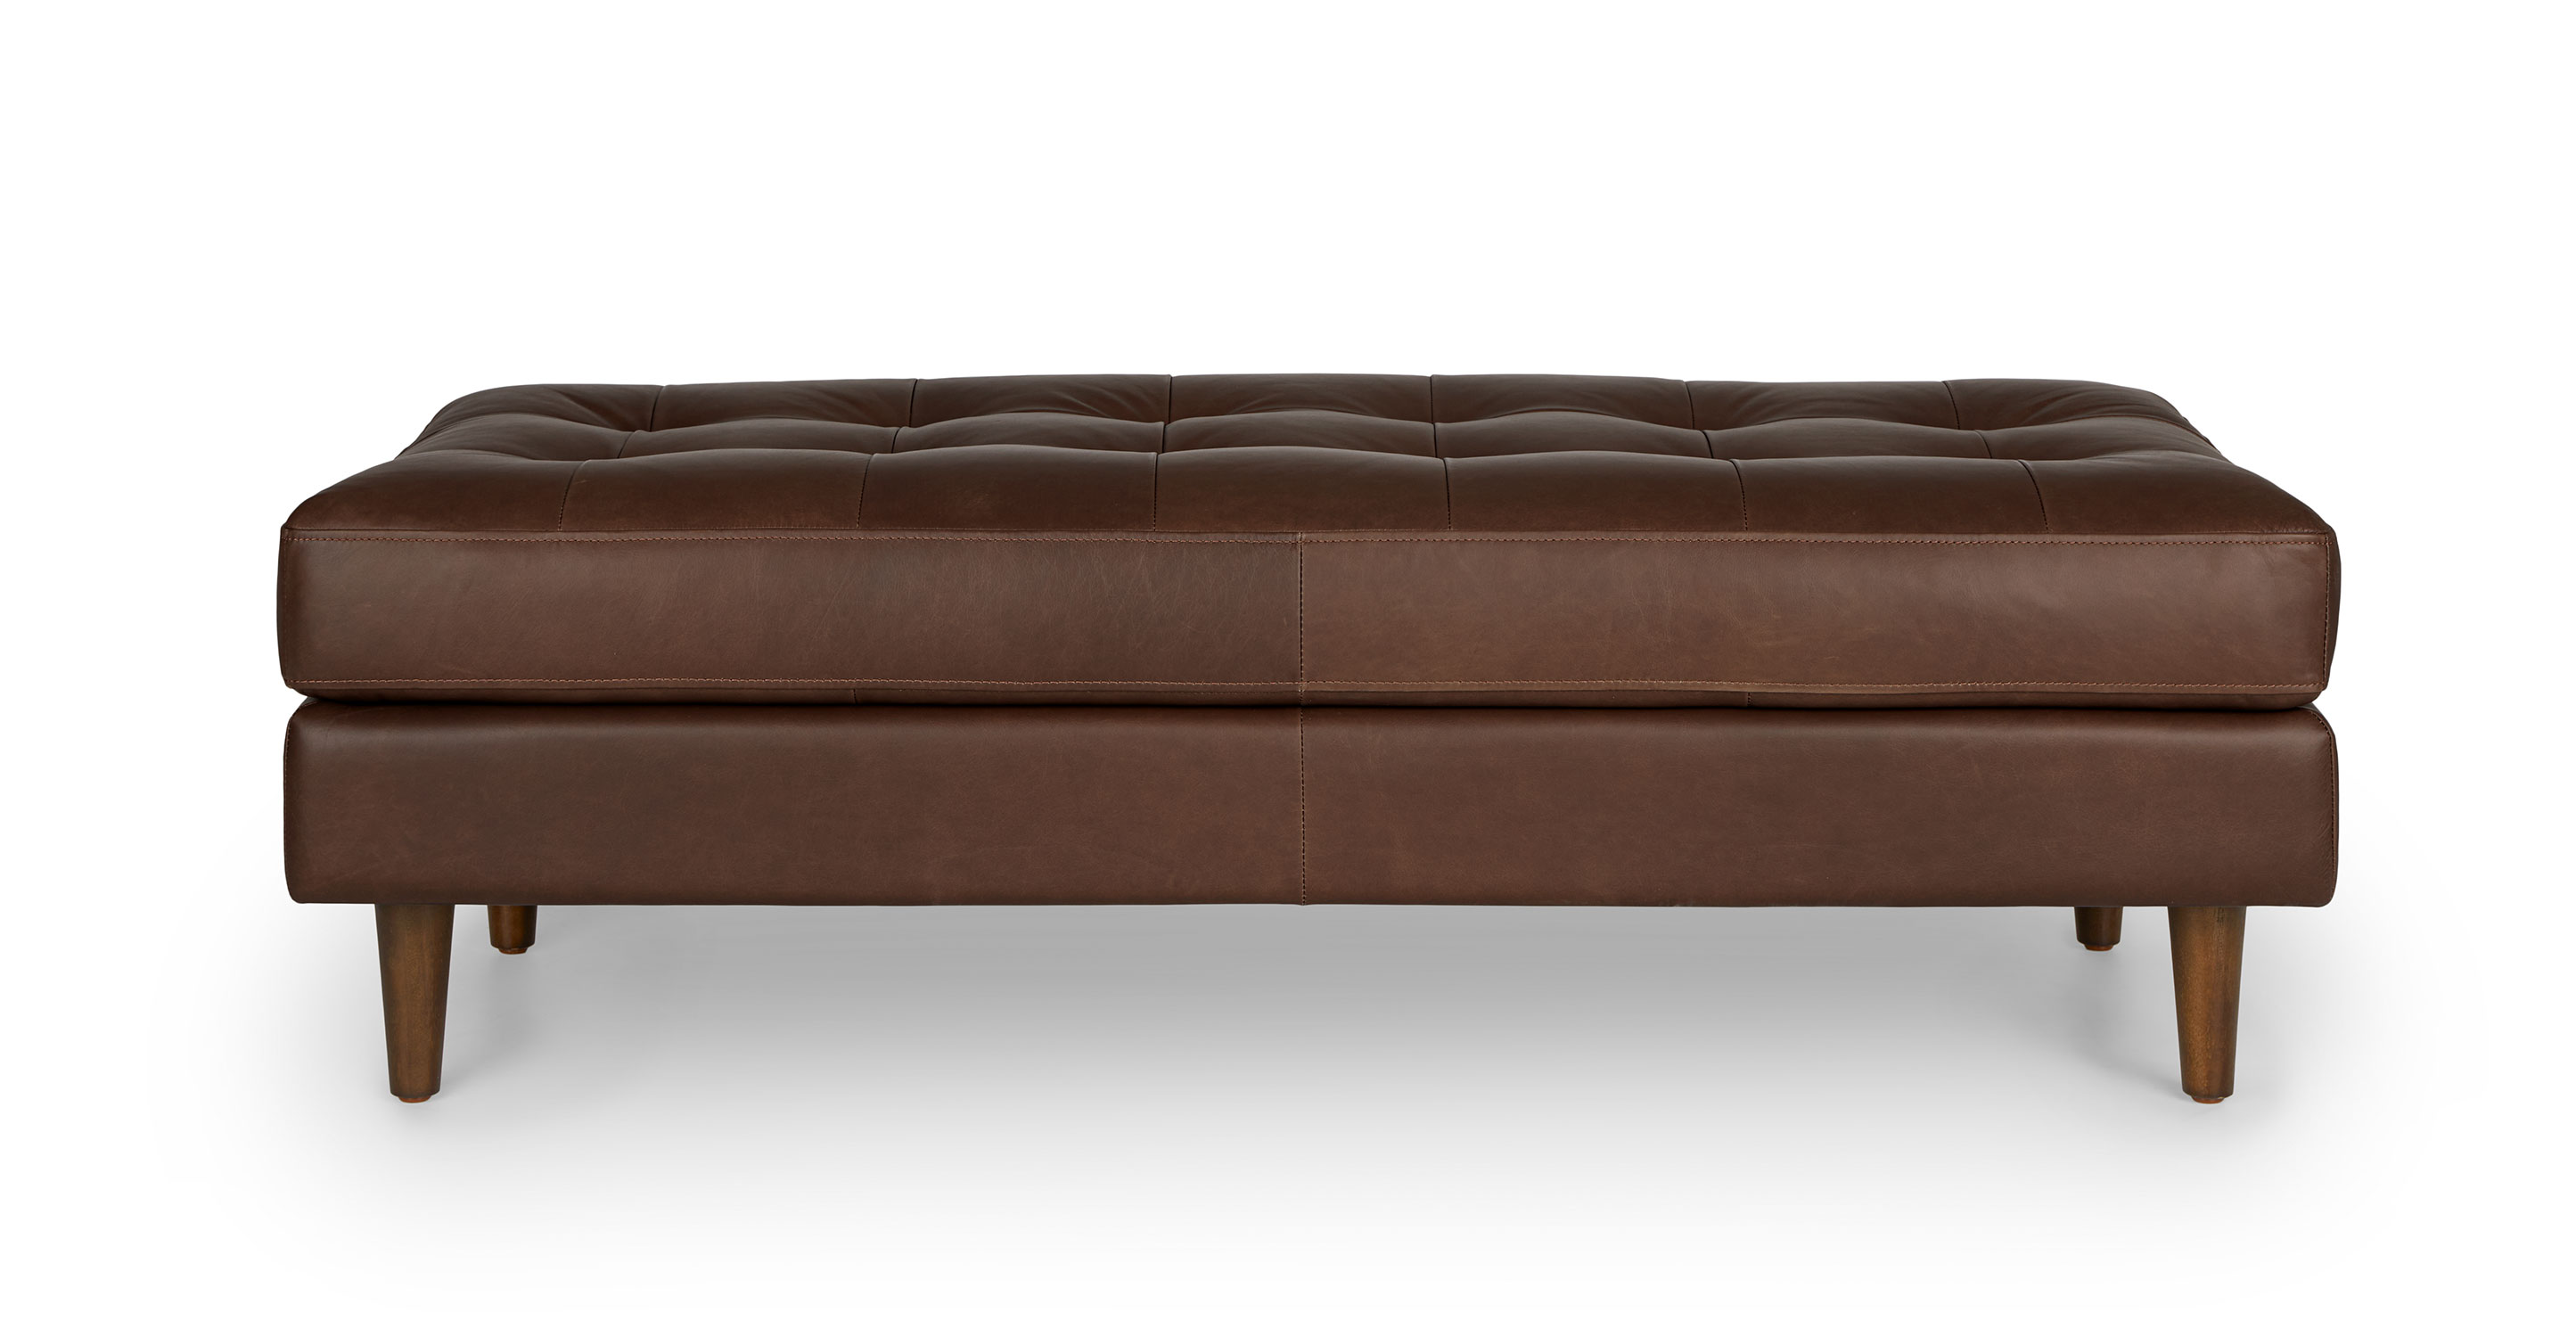 Contemporary Modern Leather Benches, Contemporary Modern Leather Benchmarks